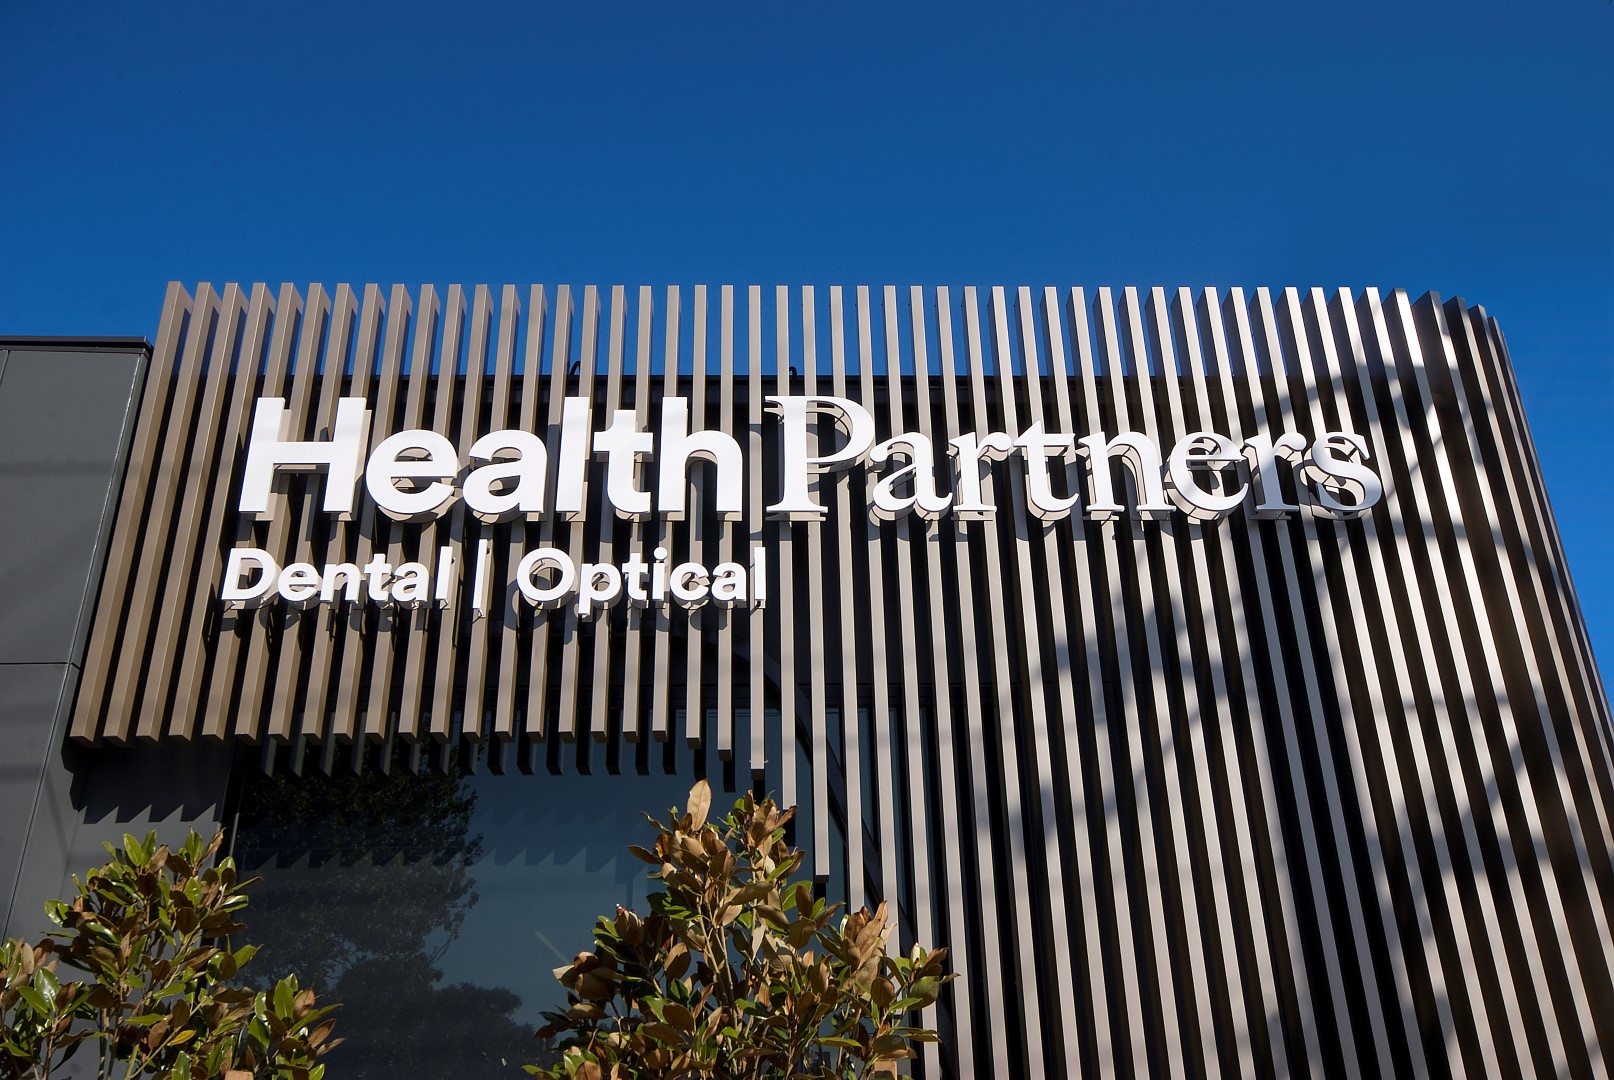 Health Partners, Grange, architectural detail and signage